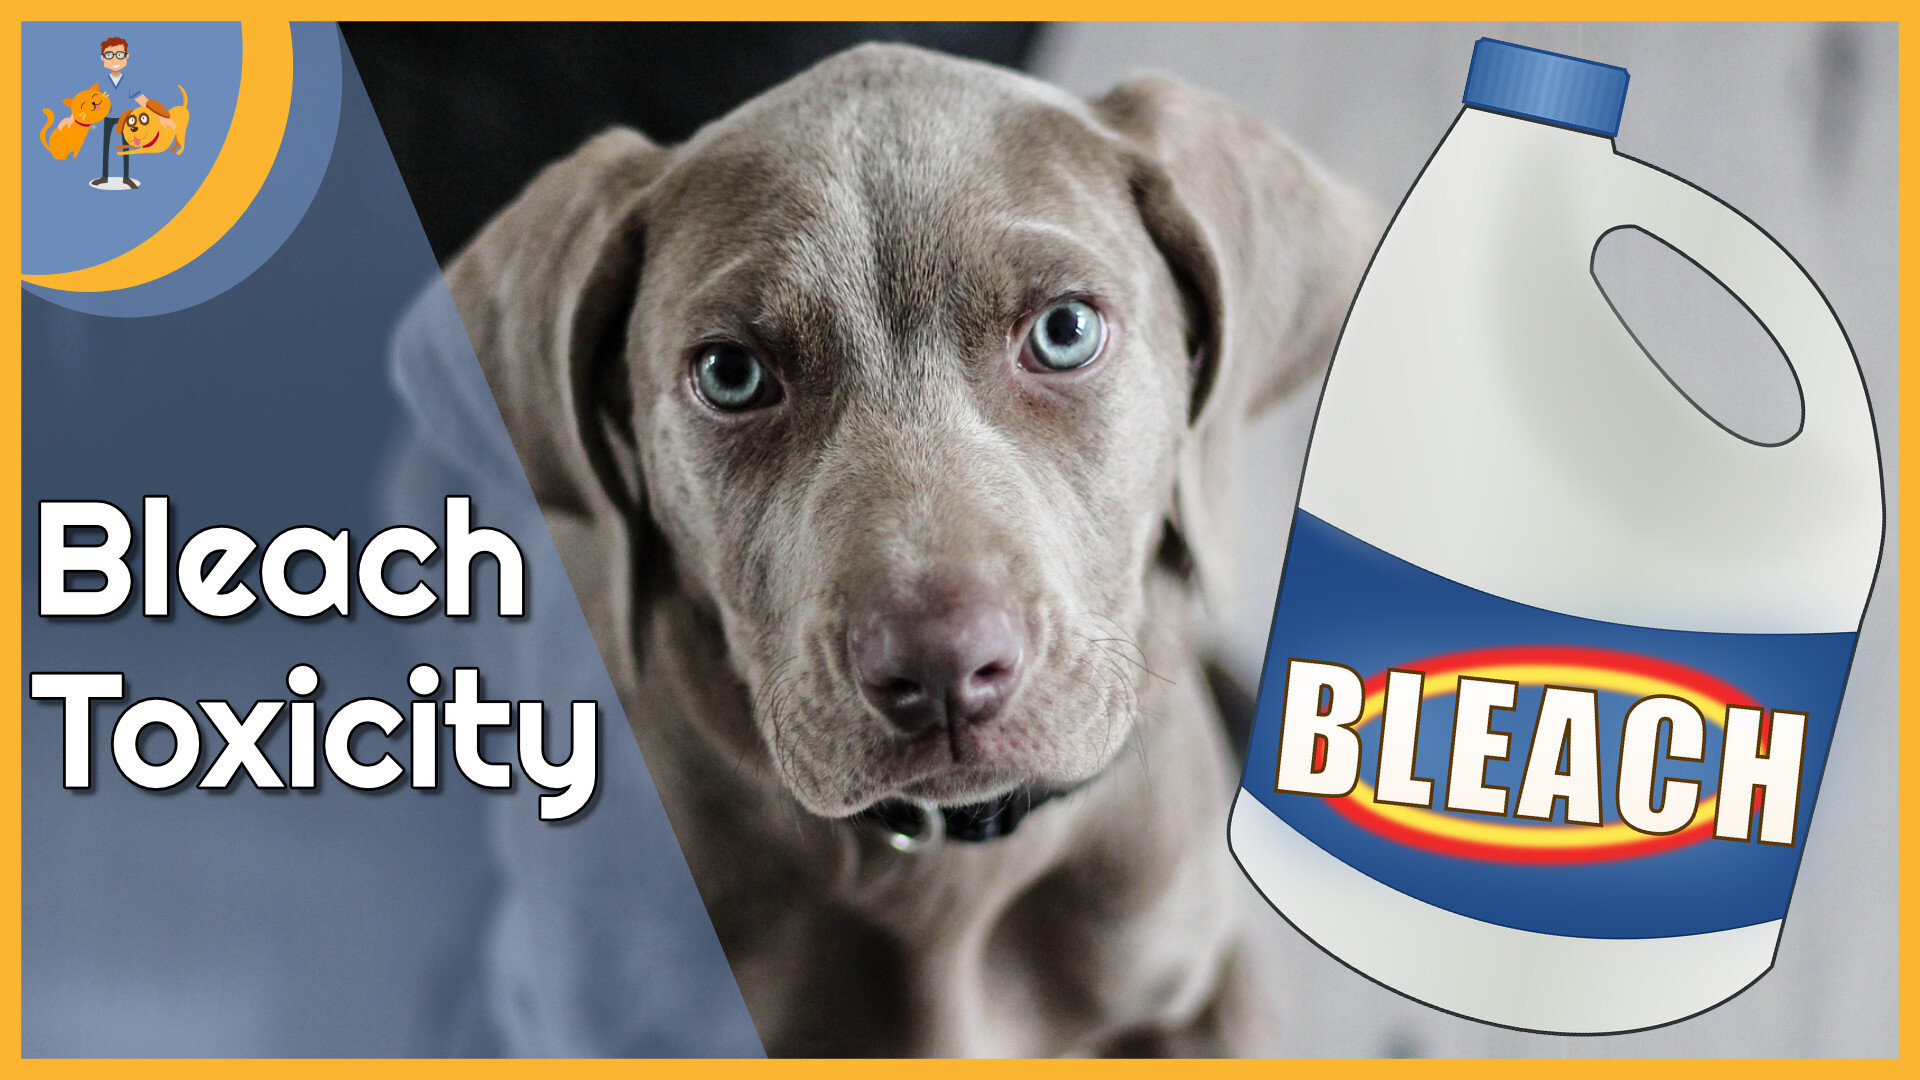 dog drank toilet water with bleach